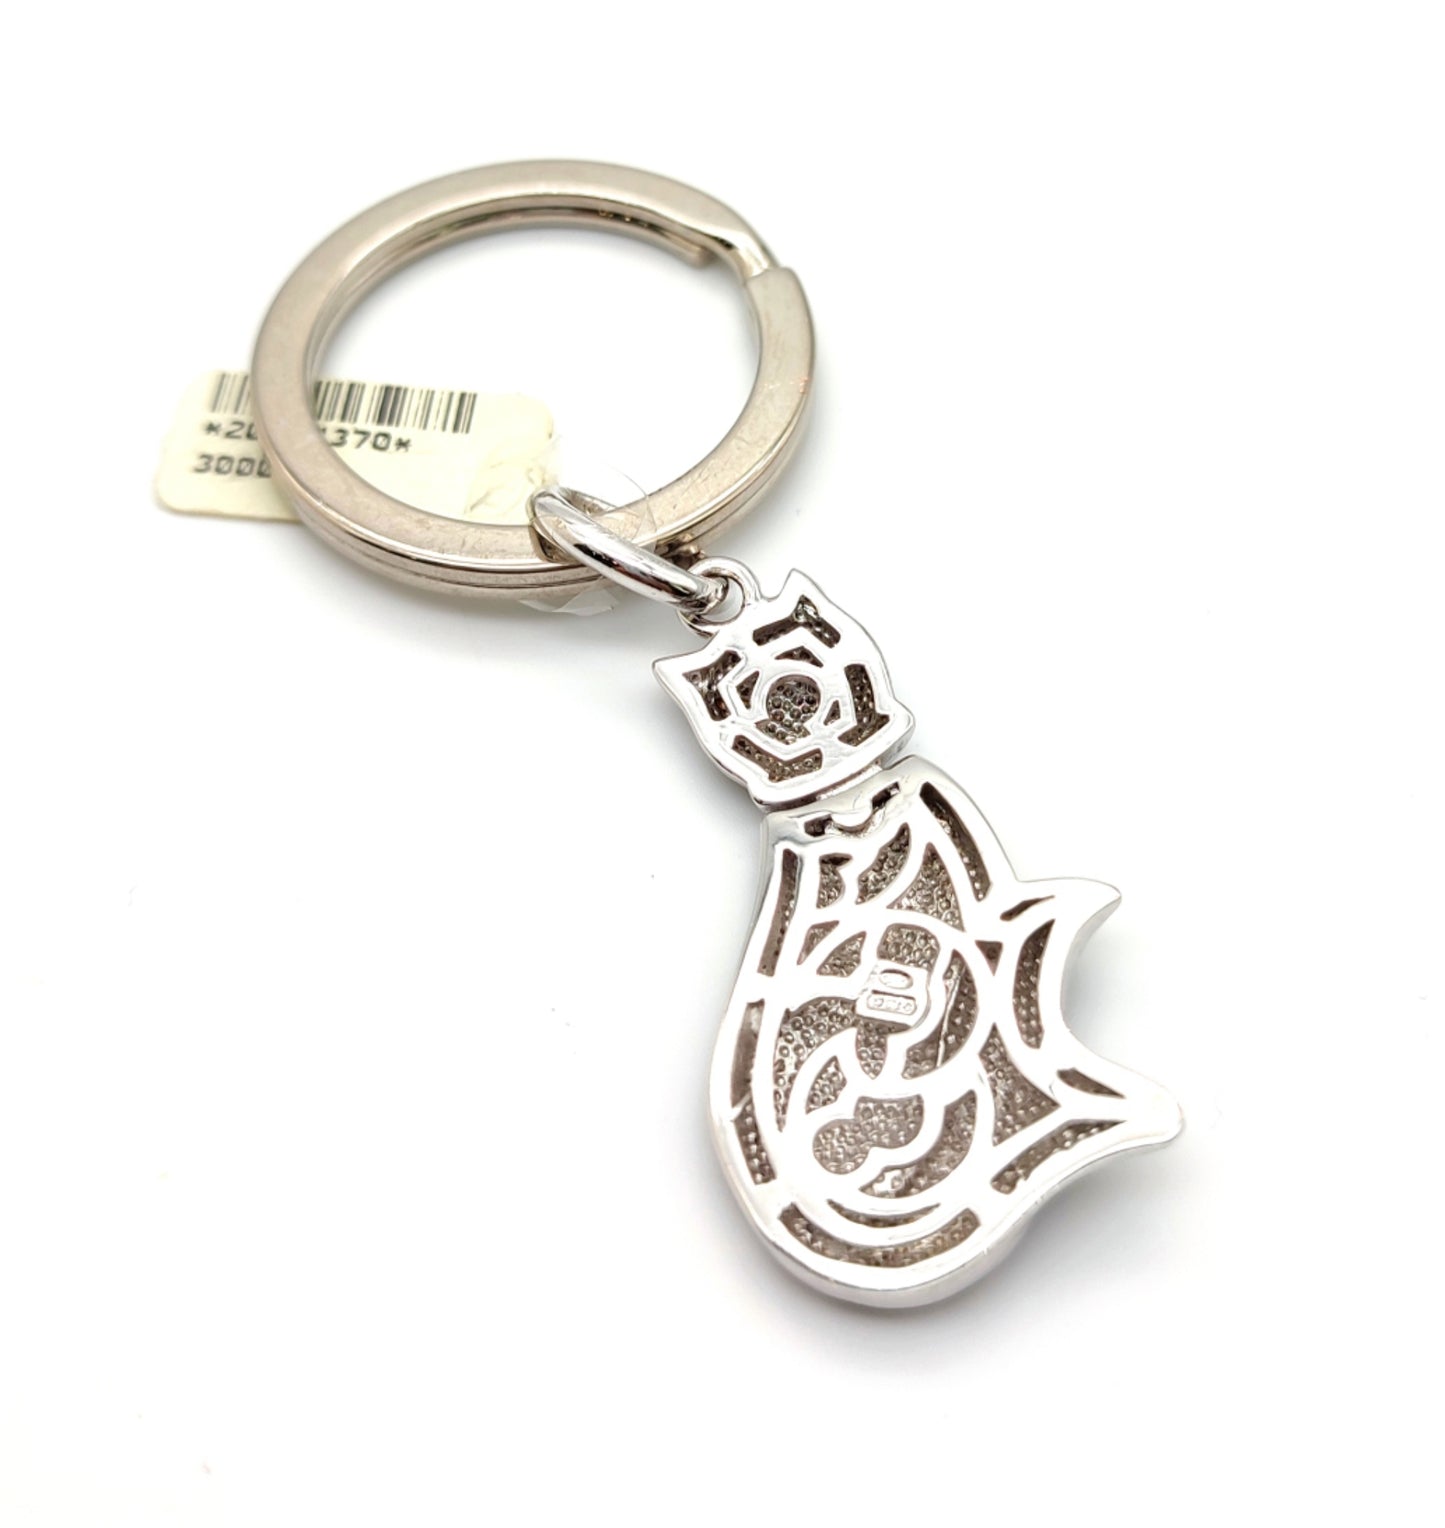 Steel and silver cat key ring